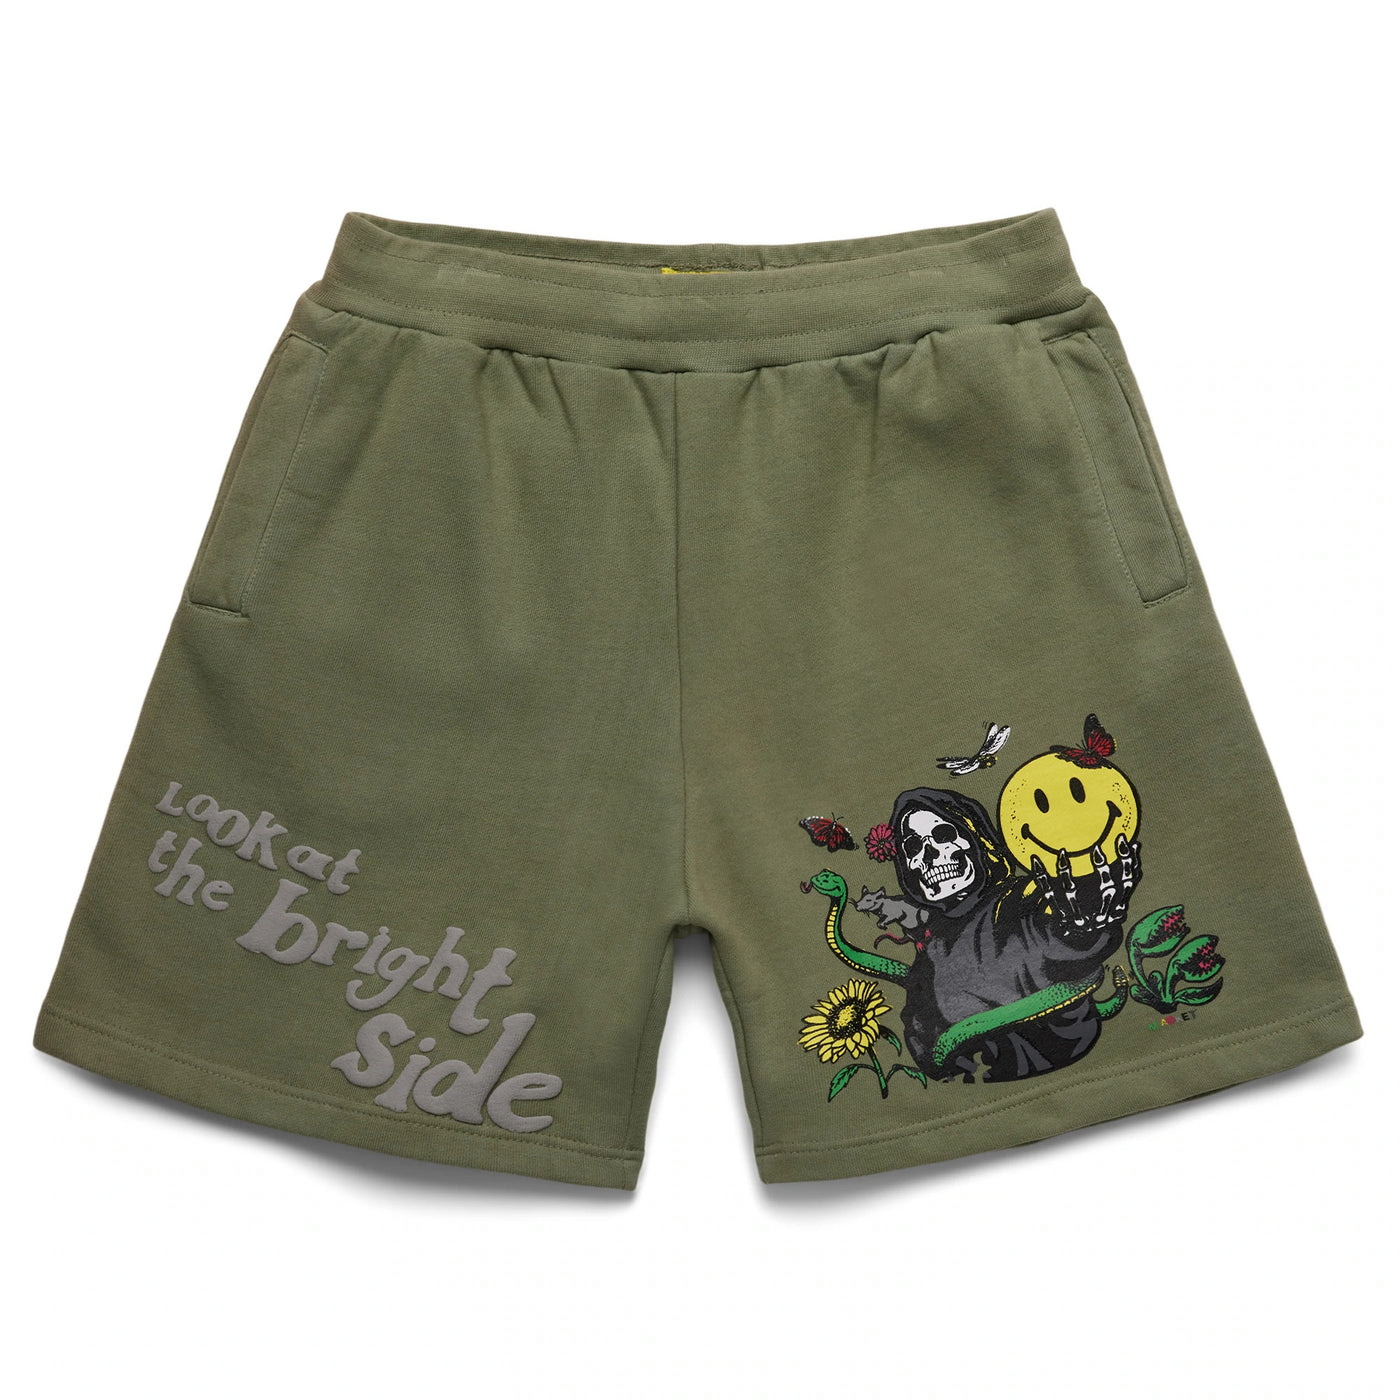 Market Smiley Look At The Bright Side Sweatshorts Sage Green Front